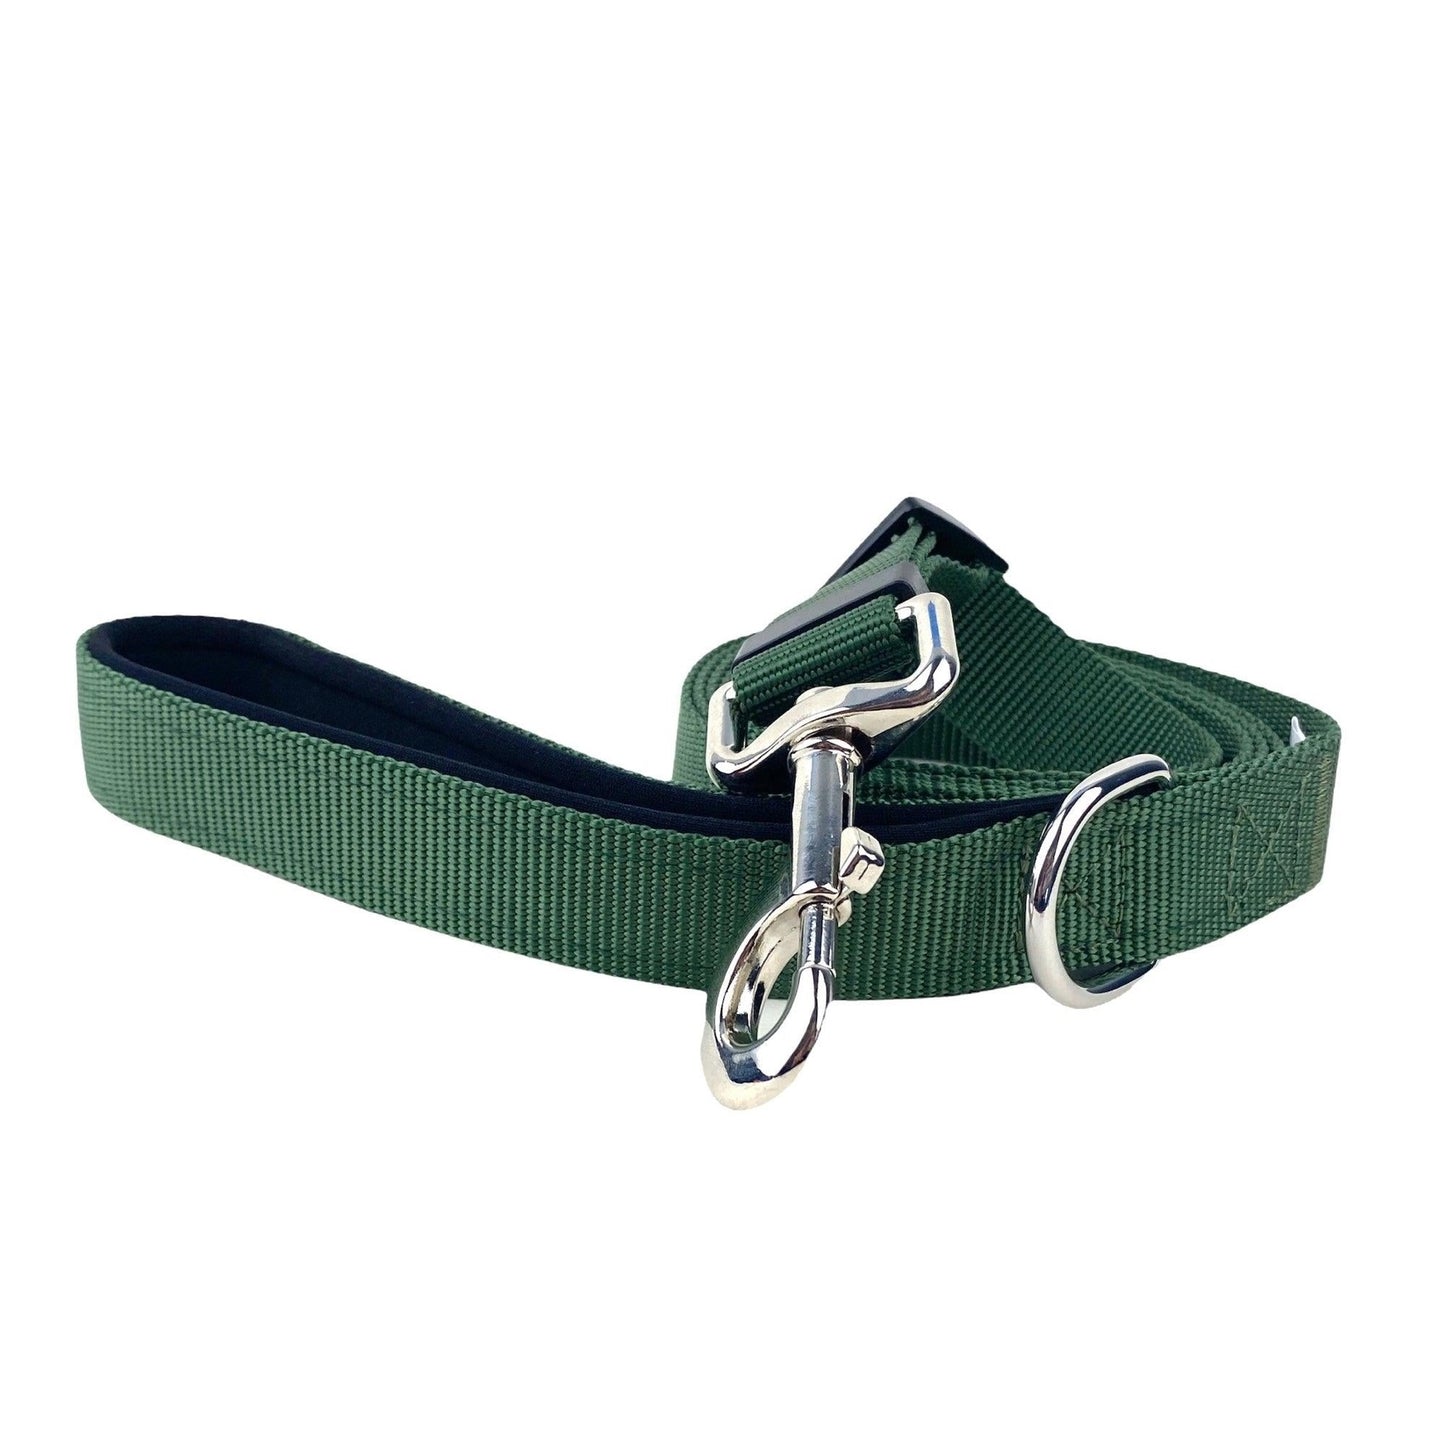 a photograph of a forest green padded handle dog leash by FearLess pet rolled up to show the snap hook